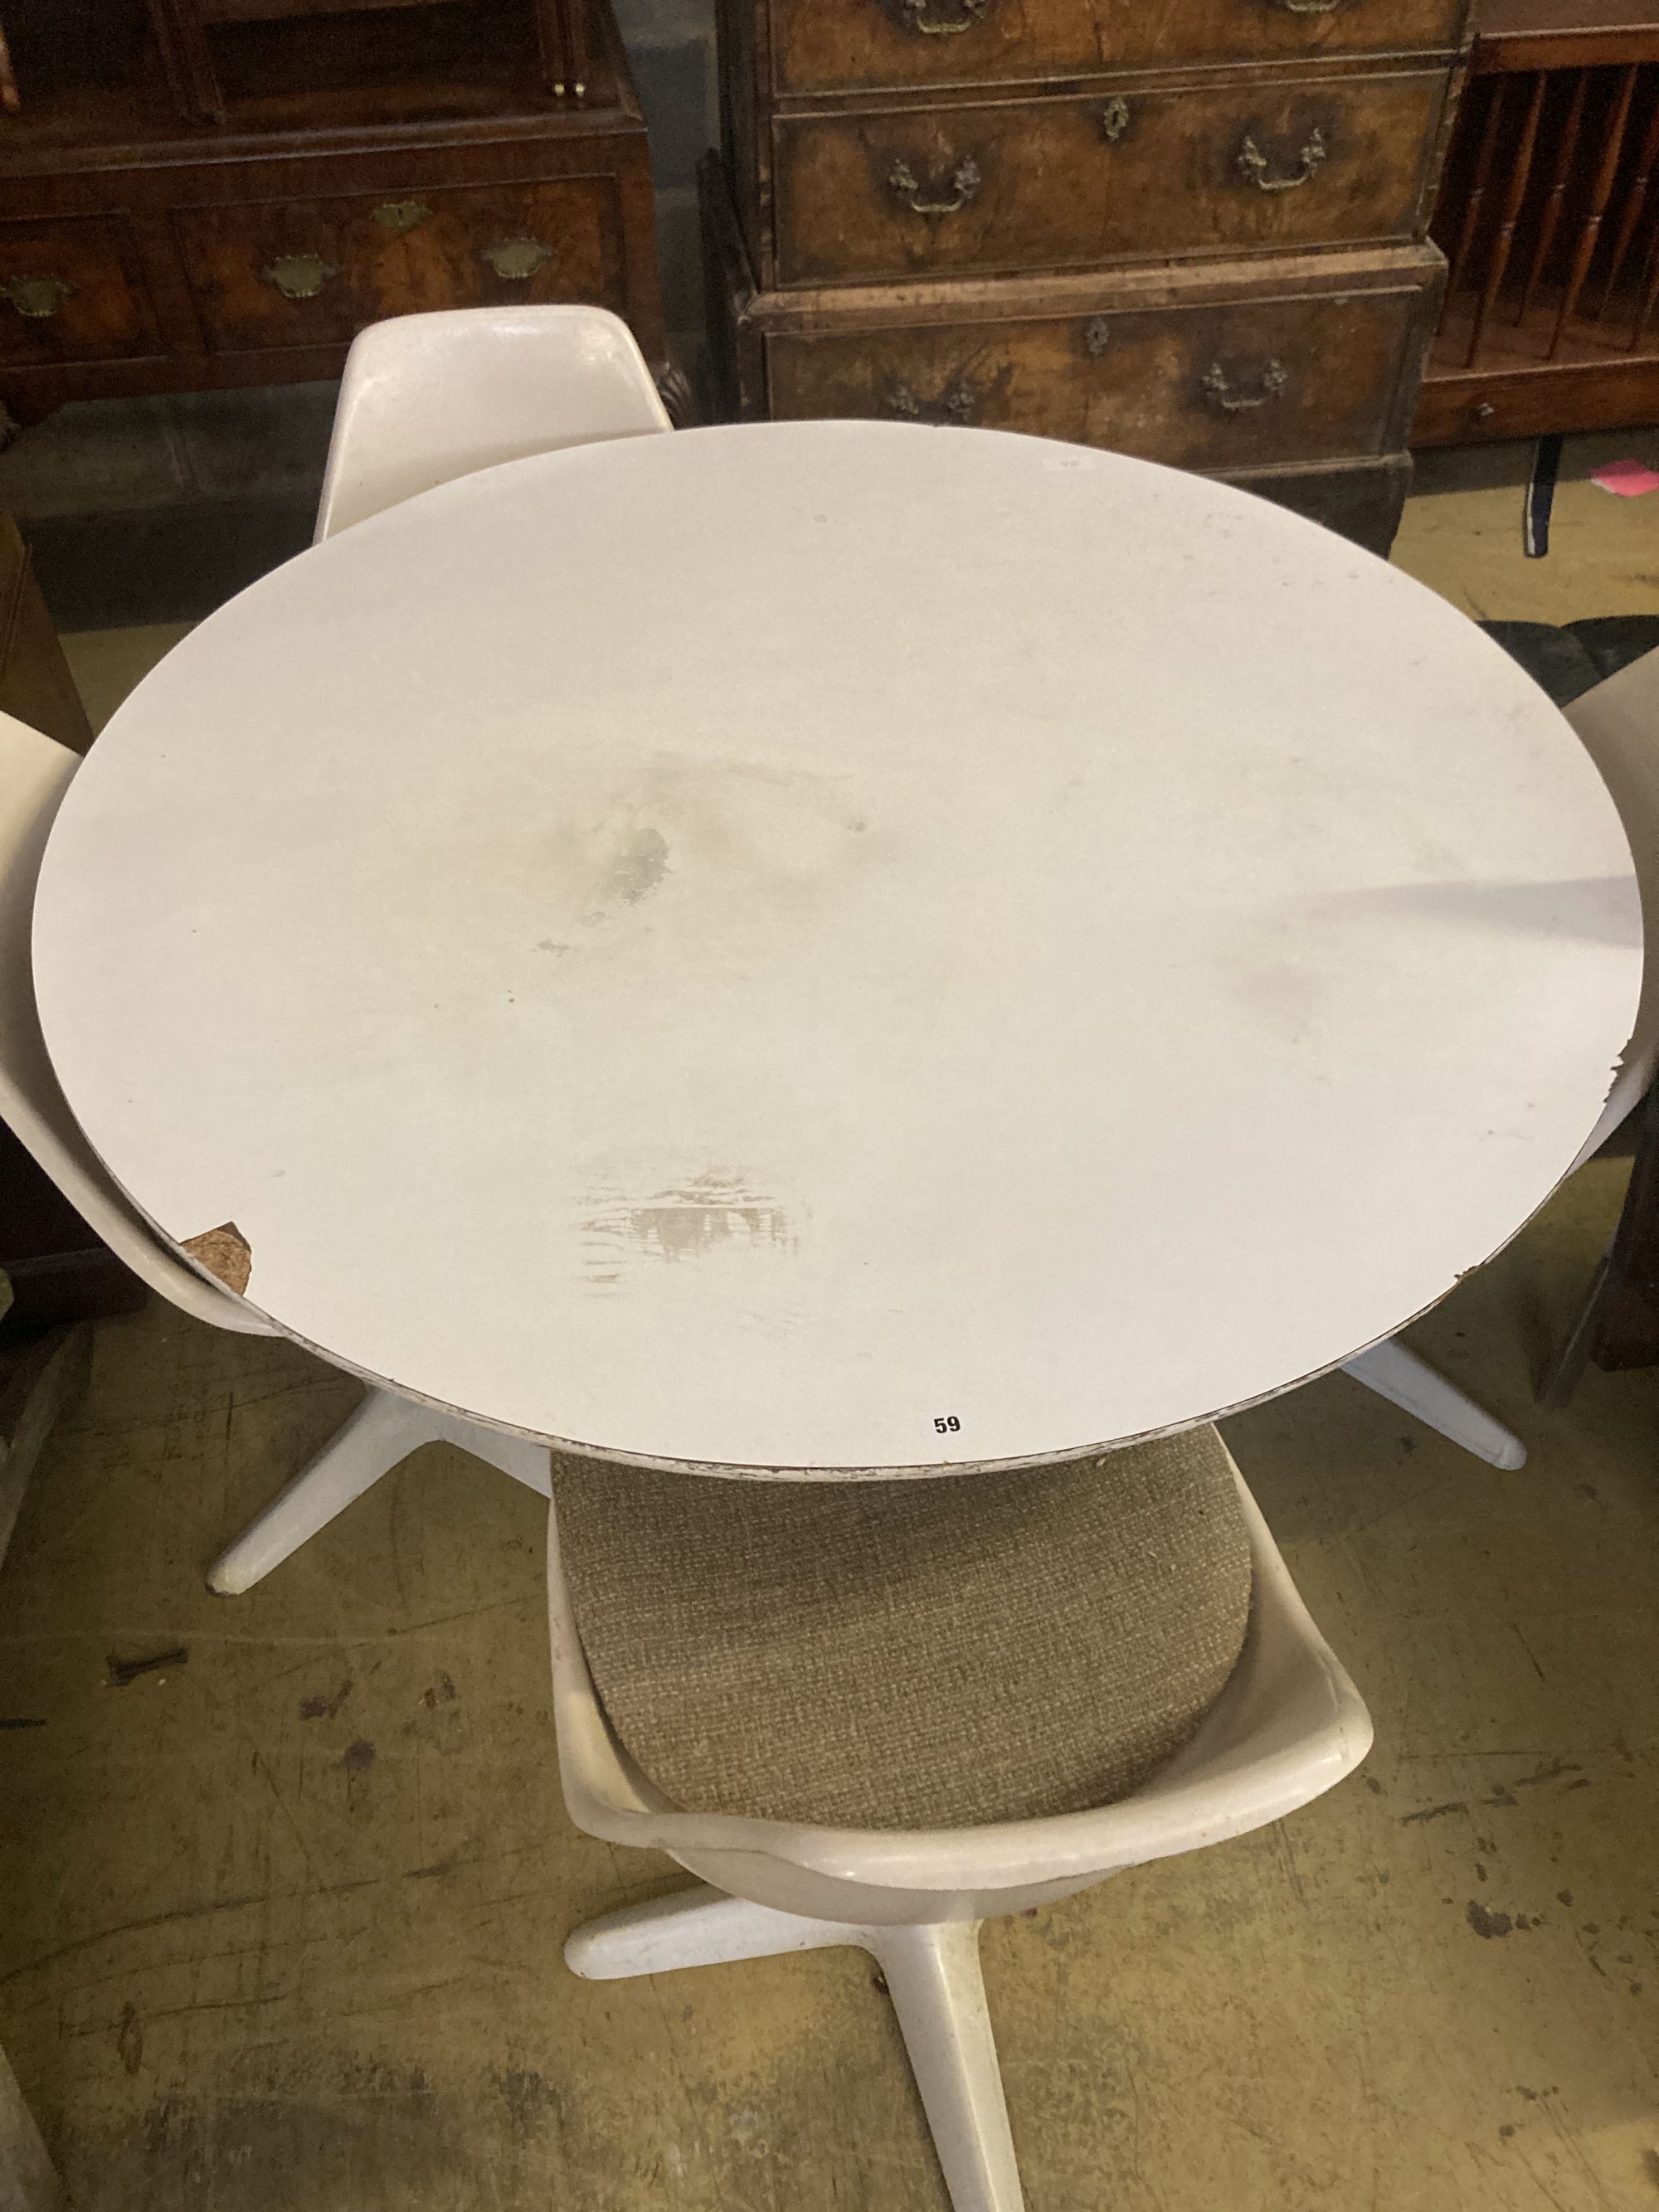 A circular tulip style table and four chairs, table diameter 121cm - Image 2 of 5